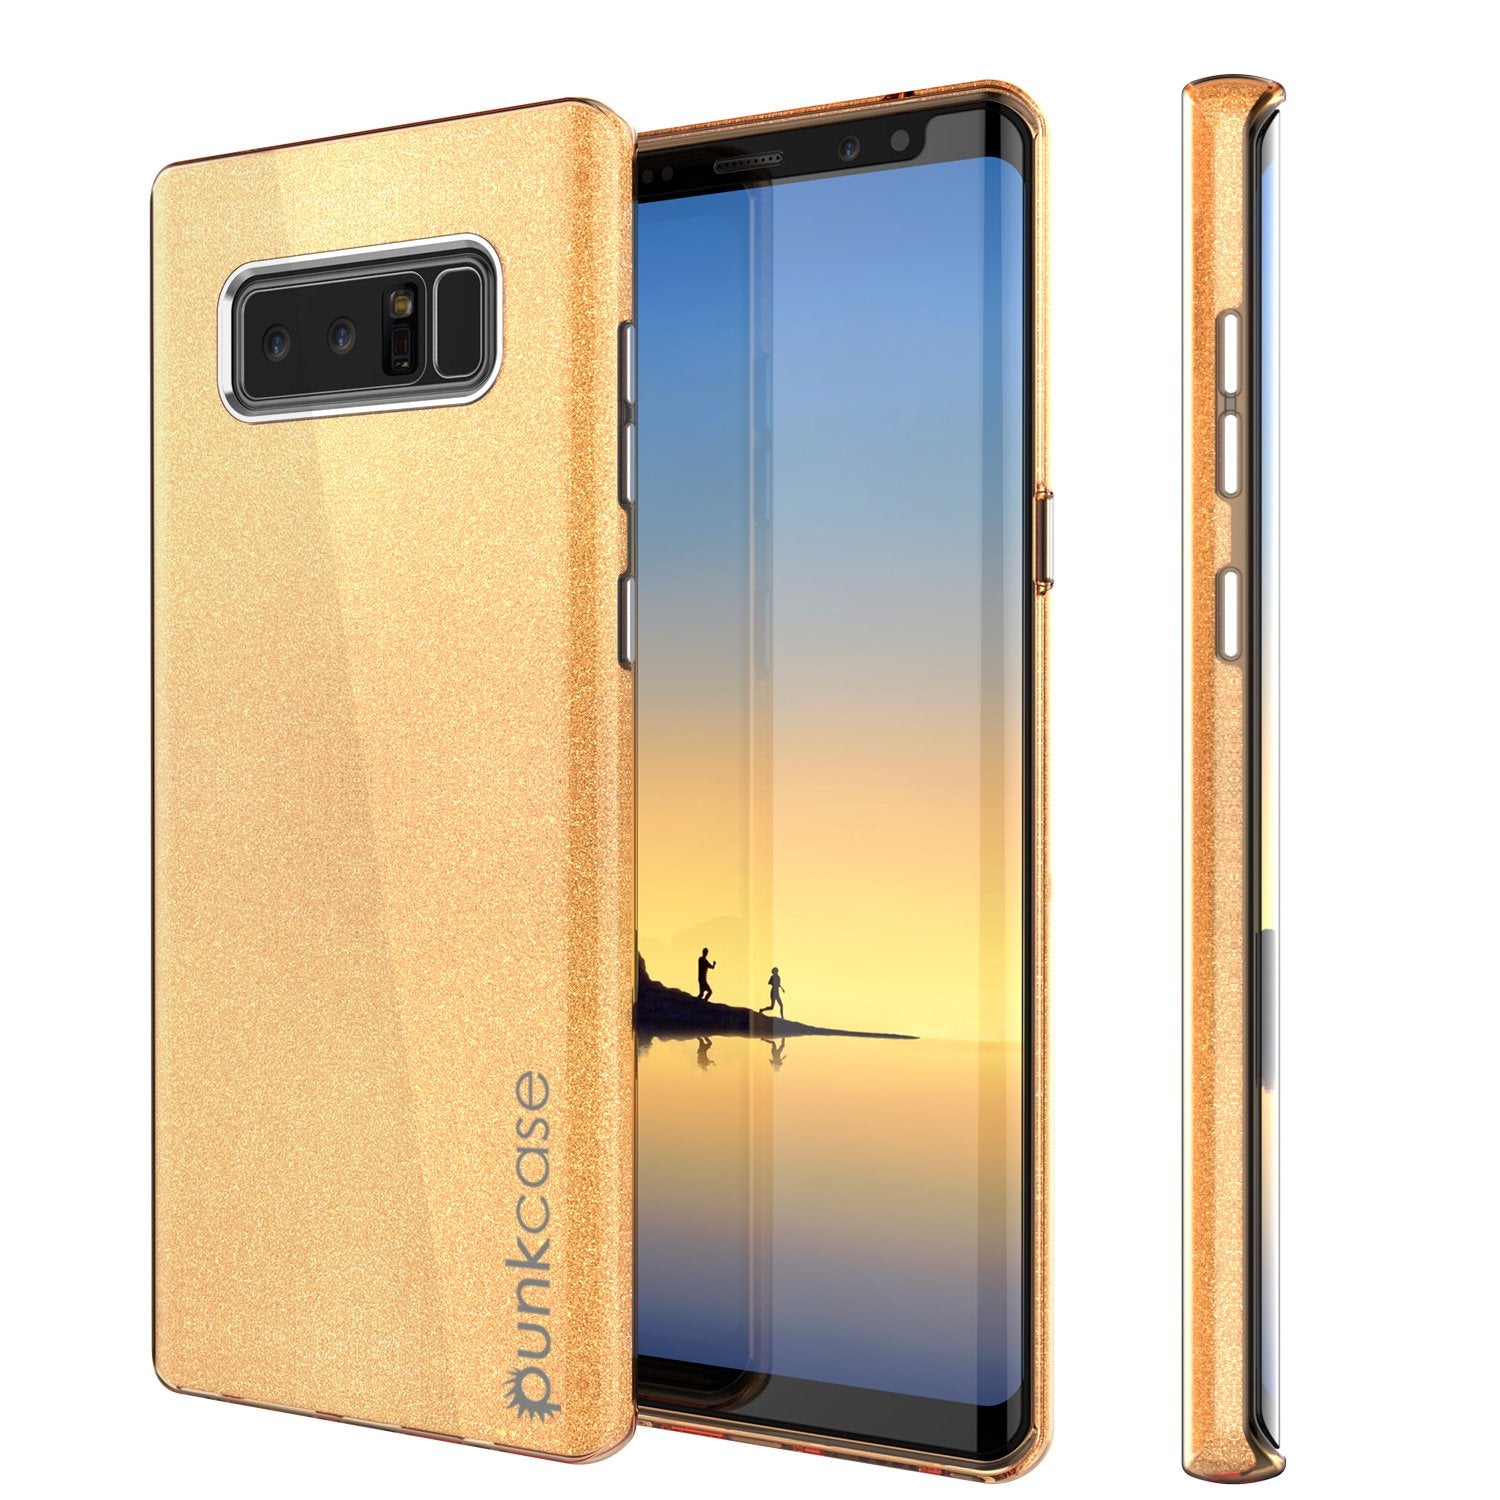 Galaxy Note 8 Case, Punkcase Galactic 2.0 Series Ultra Slim Protective Armor [Gold] - PunkCase NZ